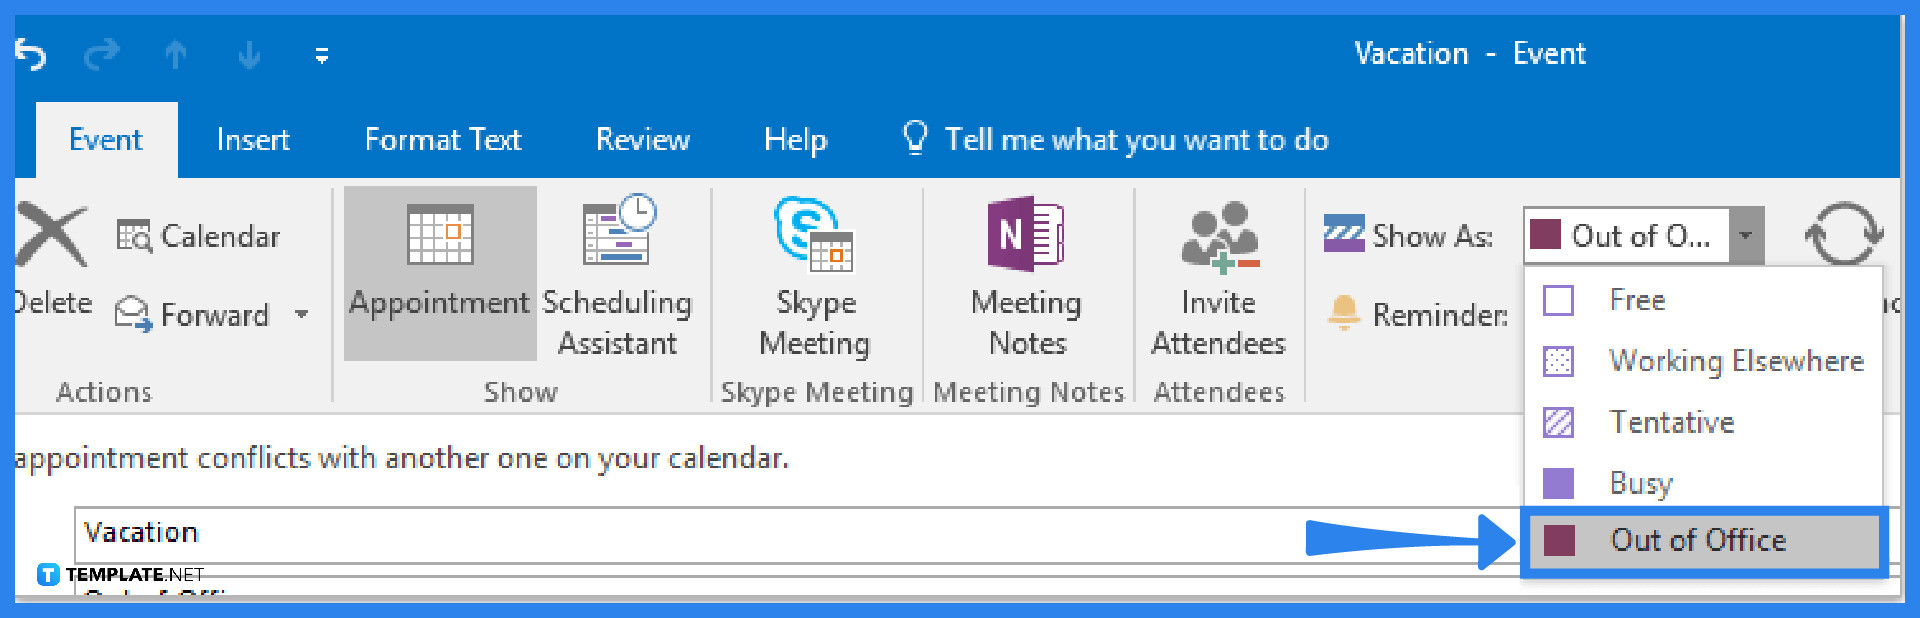 how-to-block-outoff-time-in-outlook-calendar-step-3